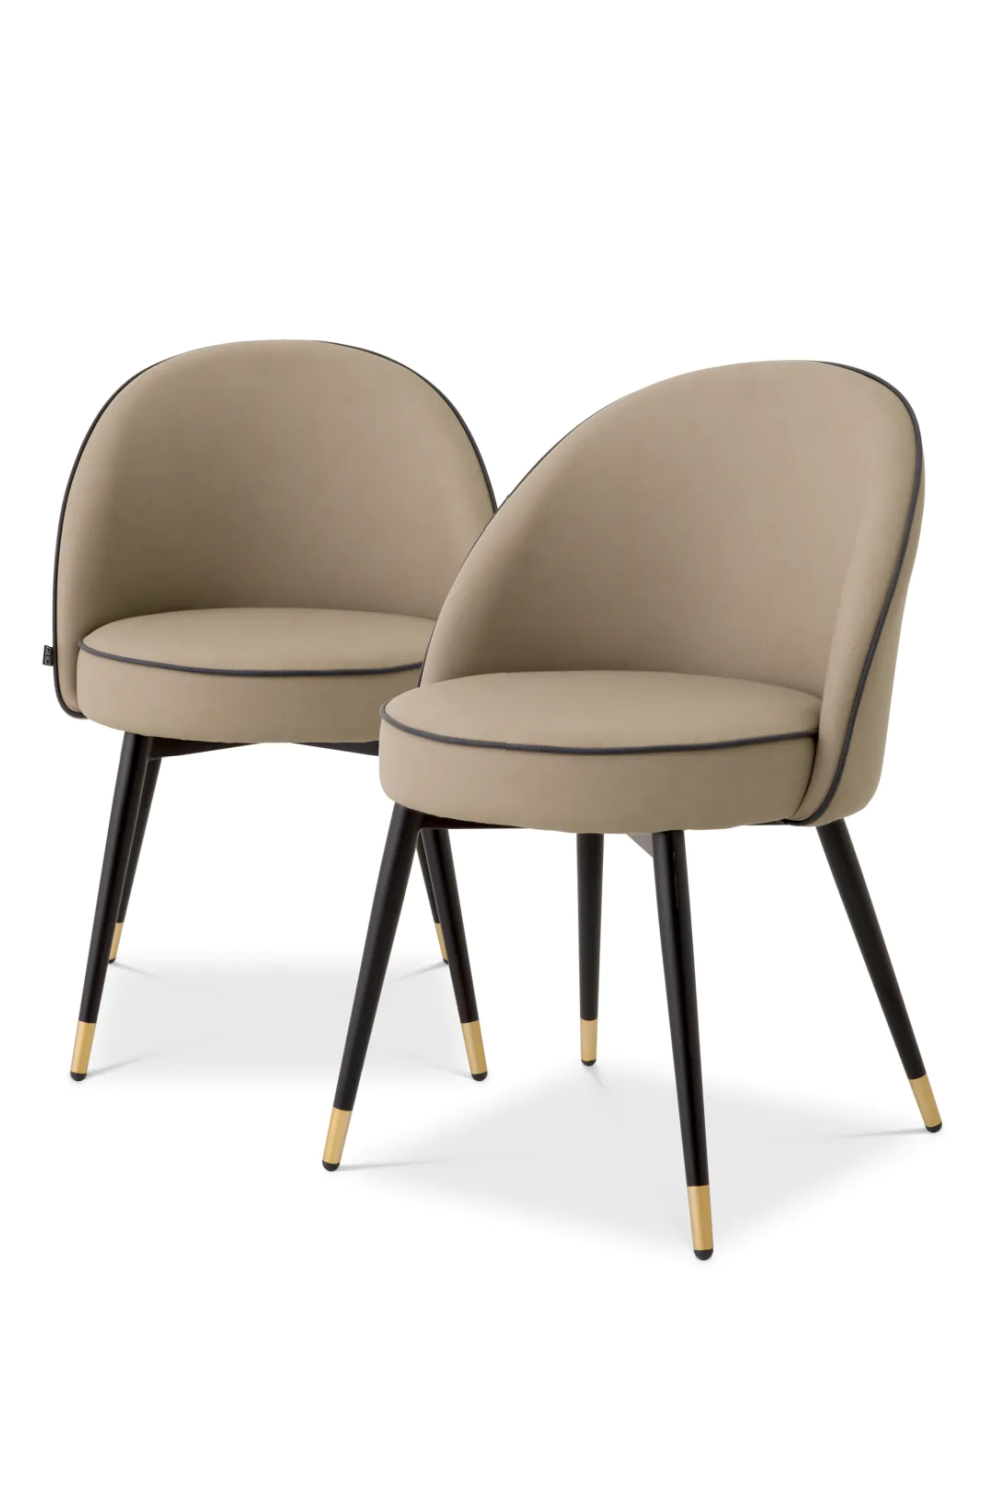 Leather Dining Chair Set (2) | Eichholtz Cooper | Oroa.com